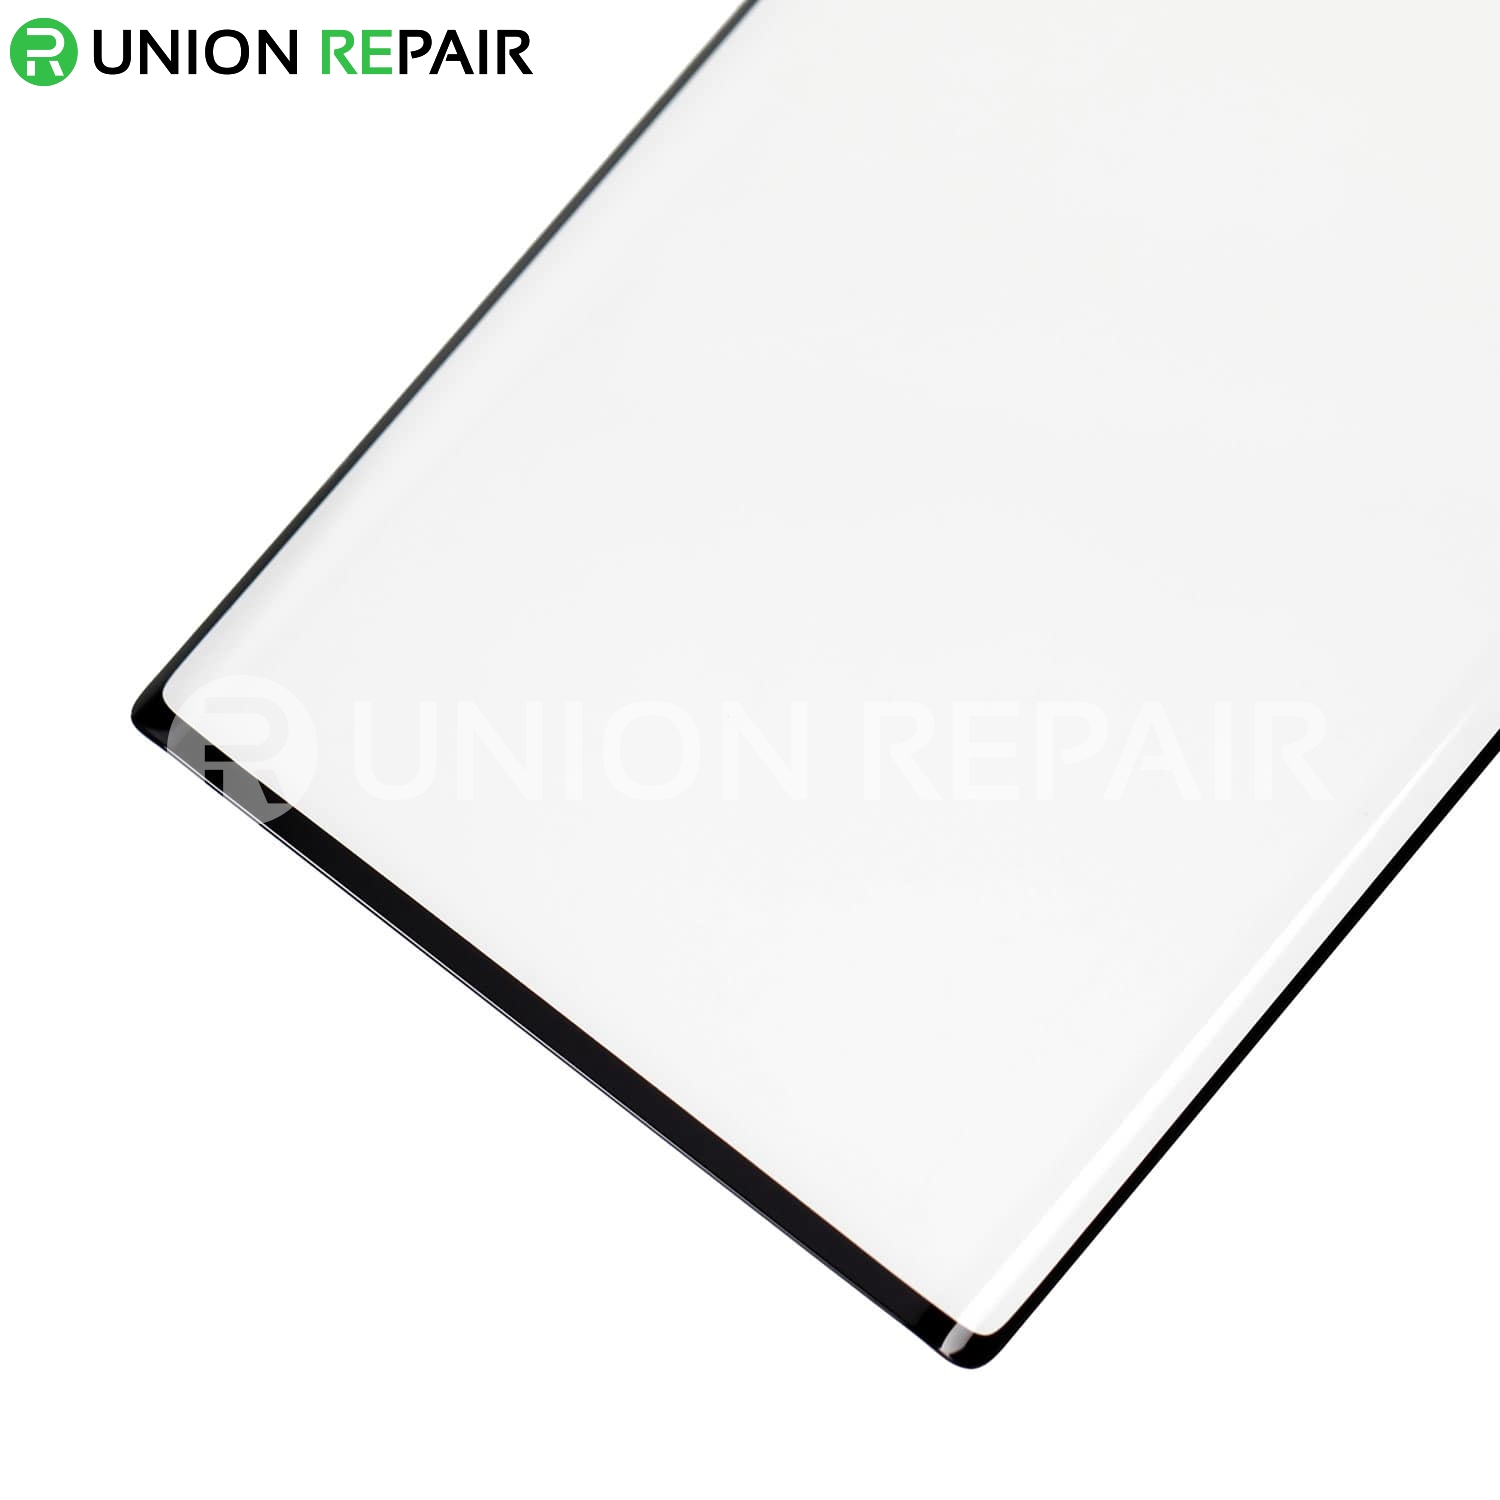 Replacement for Samsung Galaxy Note 10 Front Glass Lens - Black